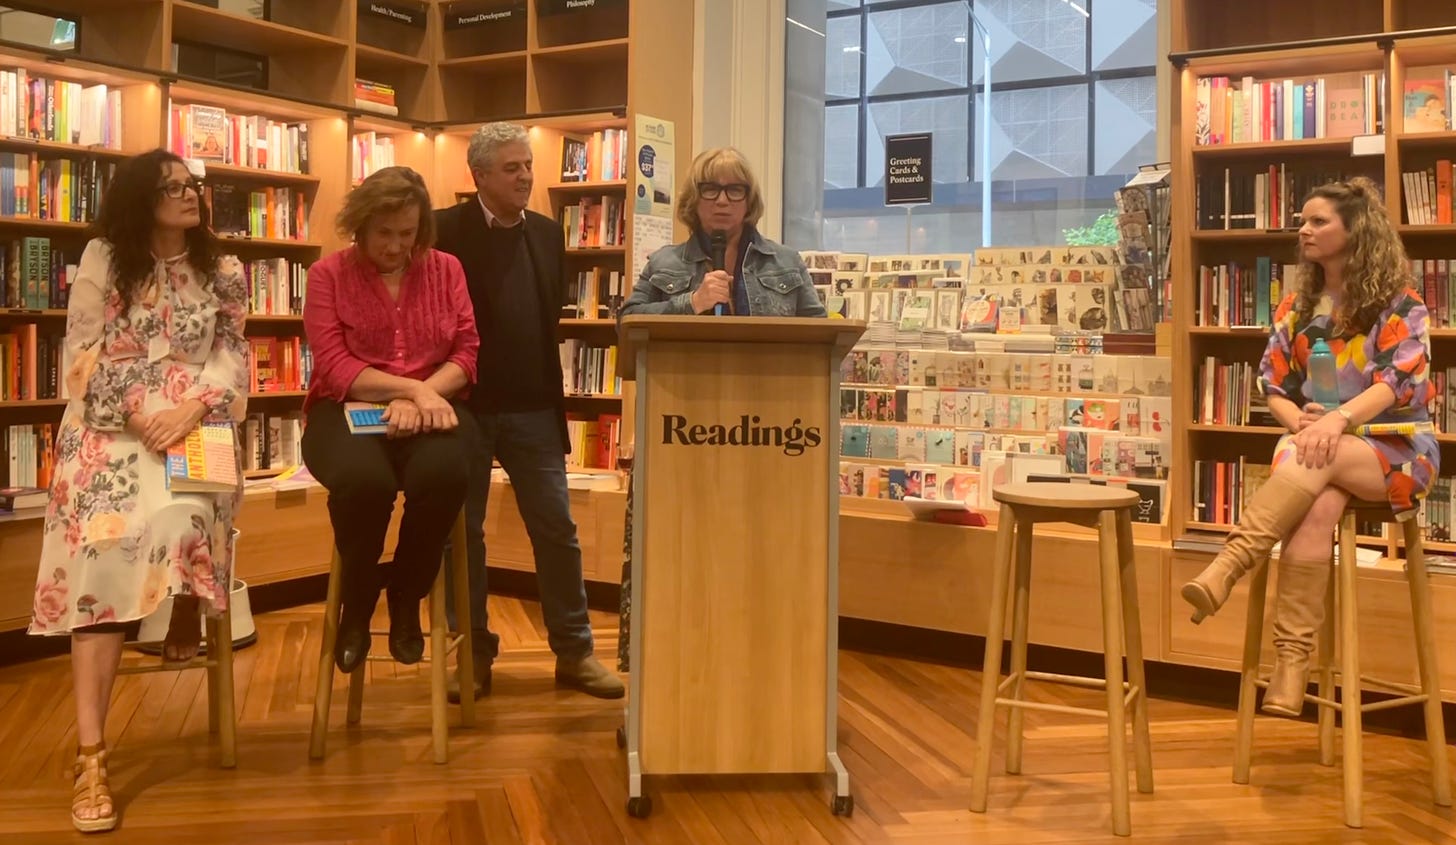 A woman stands at a lectern in a bookstore reading an excerpt from a published story. Three other women authors sit listening after their readings and a man hosting the event watches on.